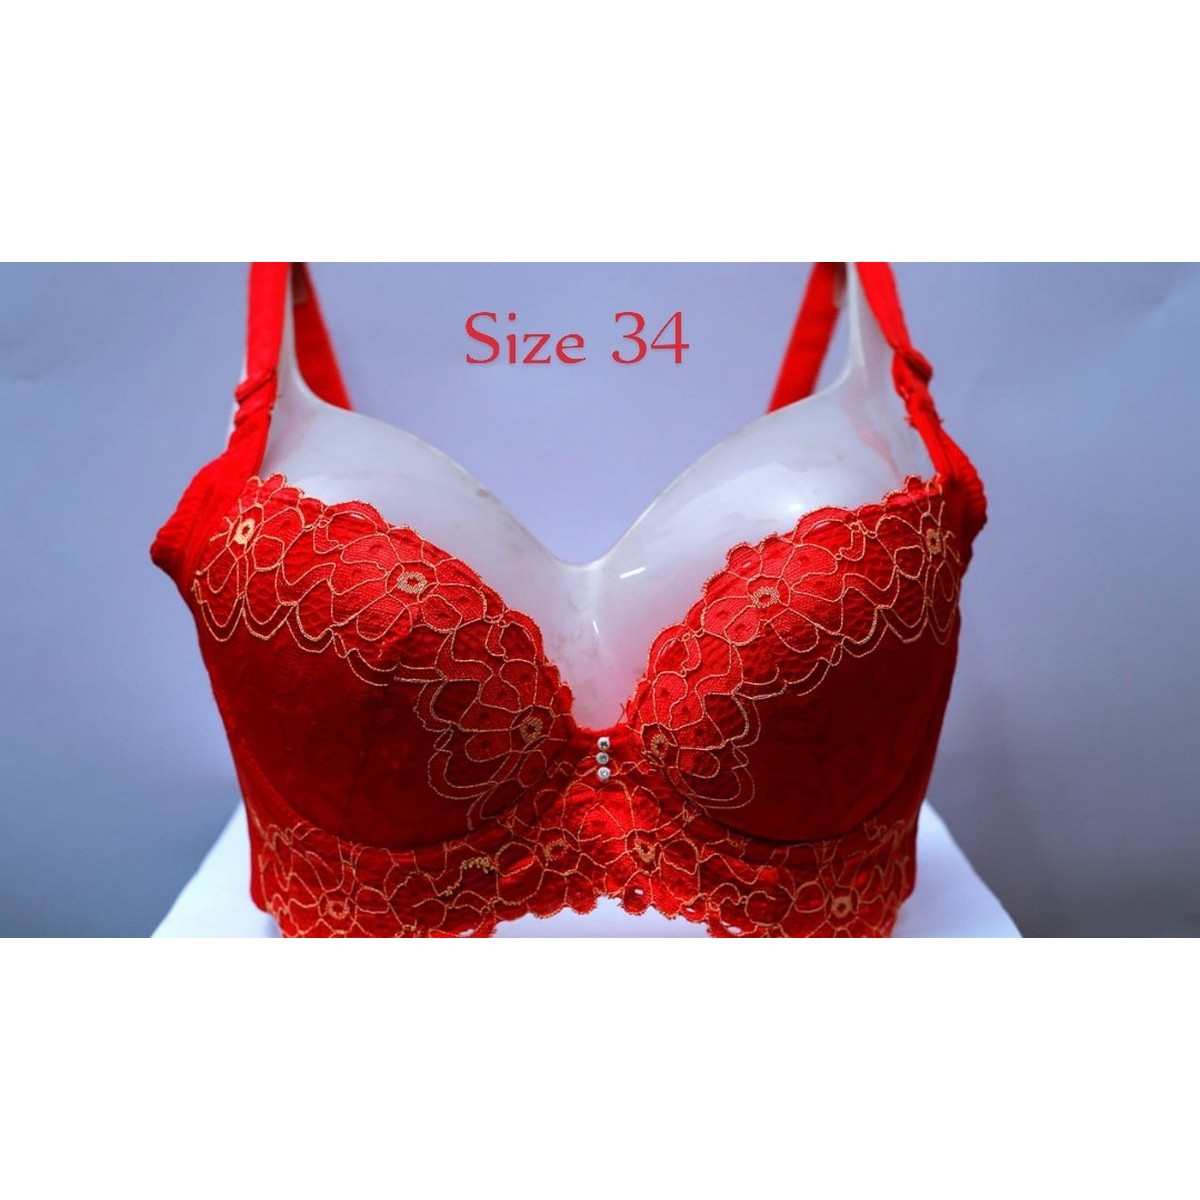 UK Imported Sexy Lingerie Double Padding Embroidery Bra